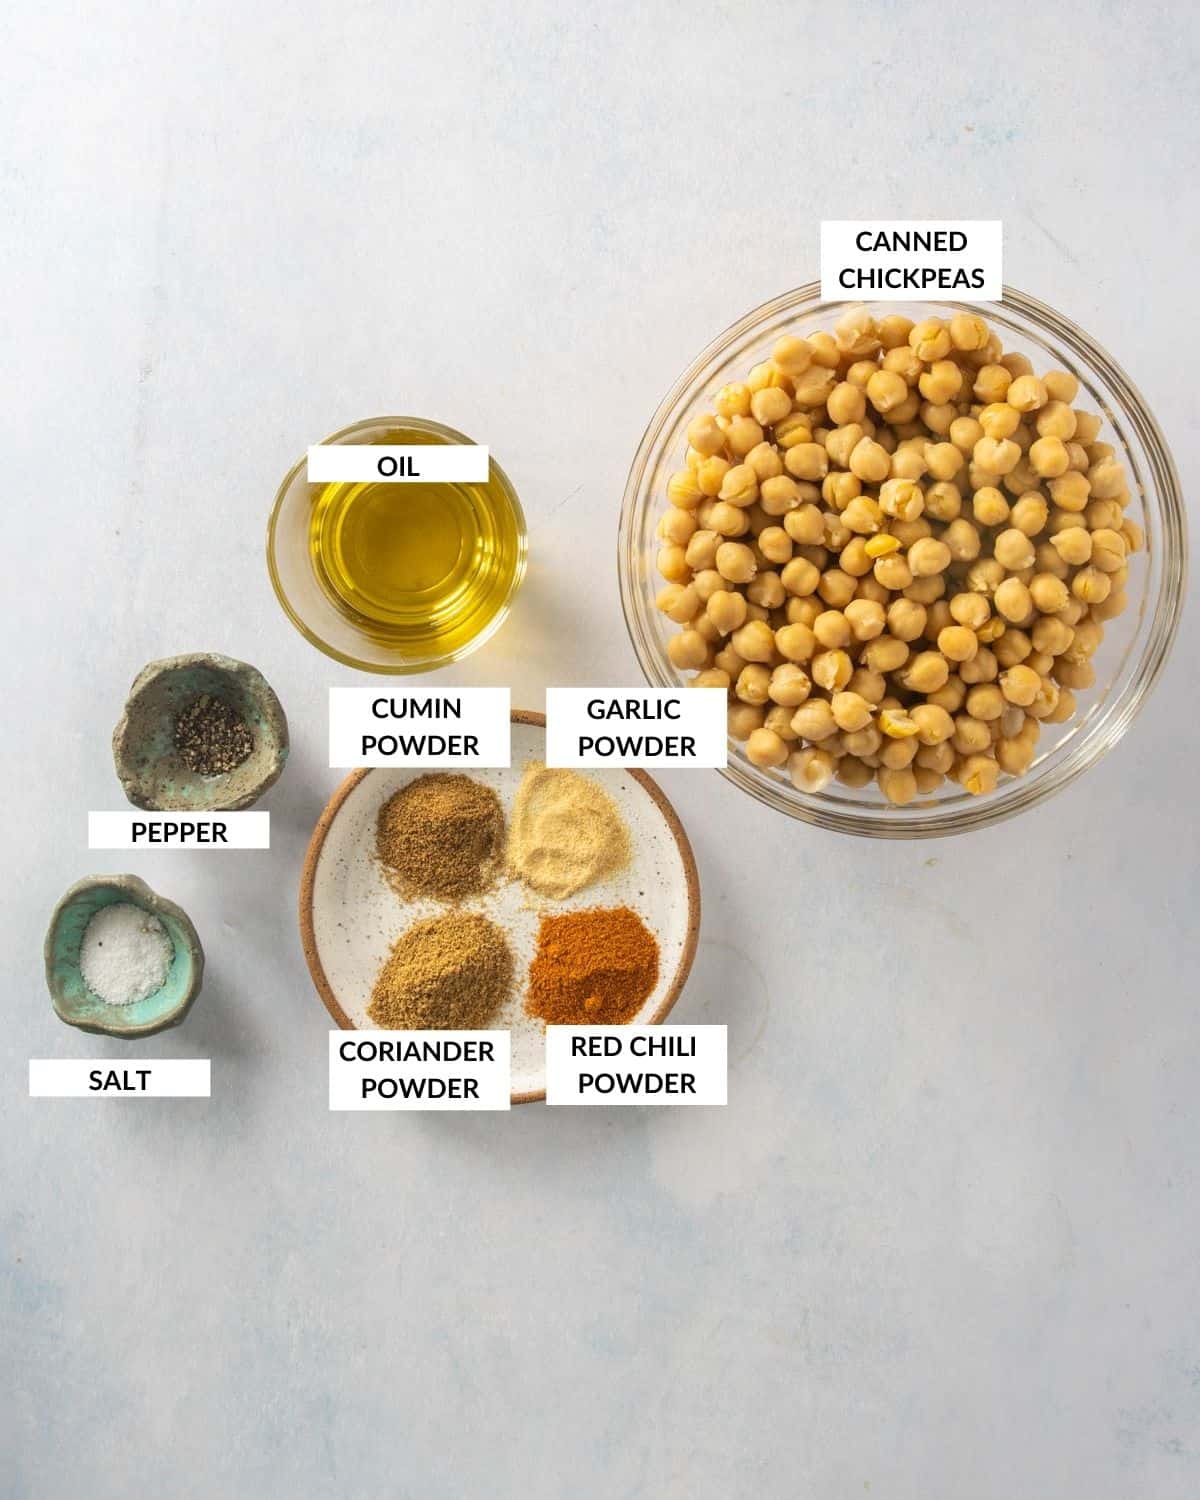 Labeled ingredient list for making roasted chana - check recipe card for details